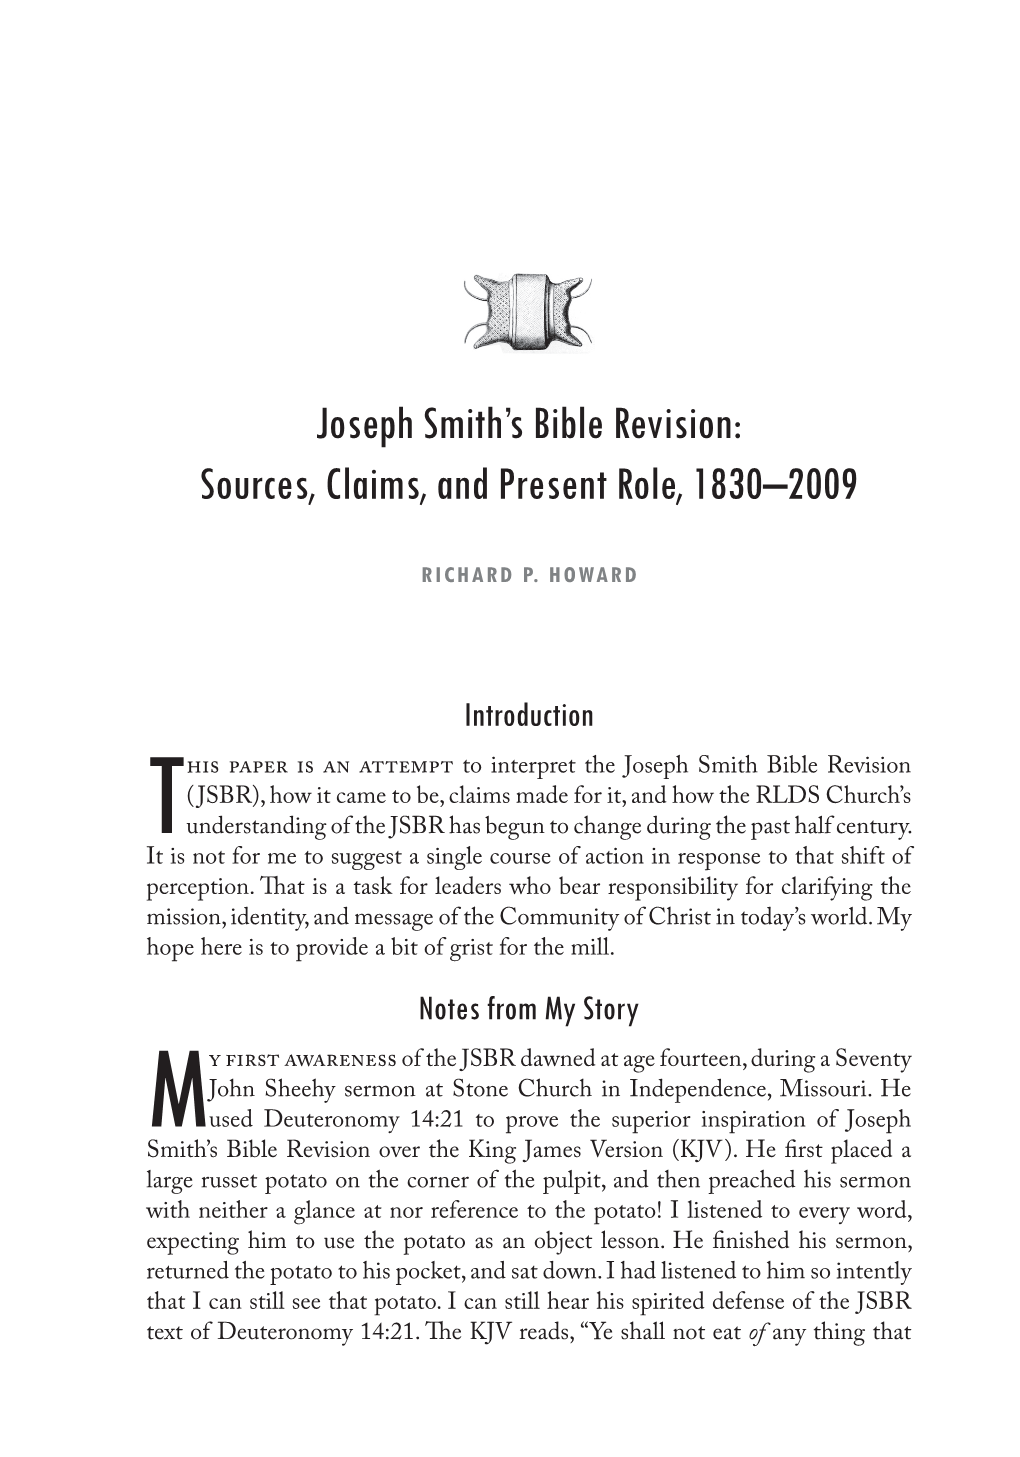 Joseph Smith's Bible Revision: Sources, Claims, and Present Role